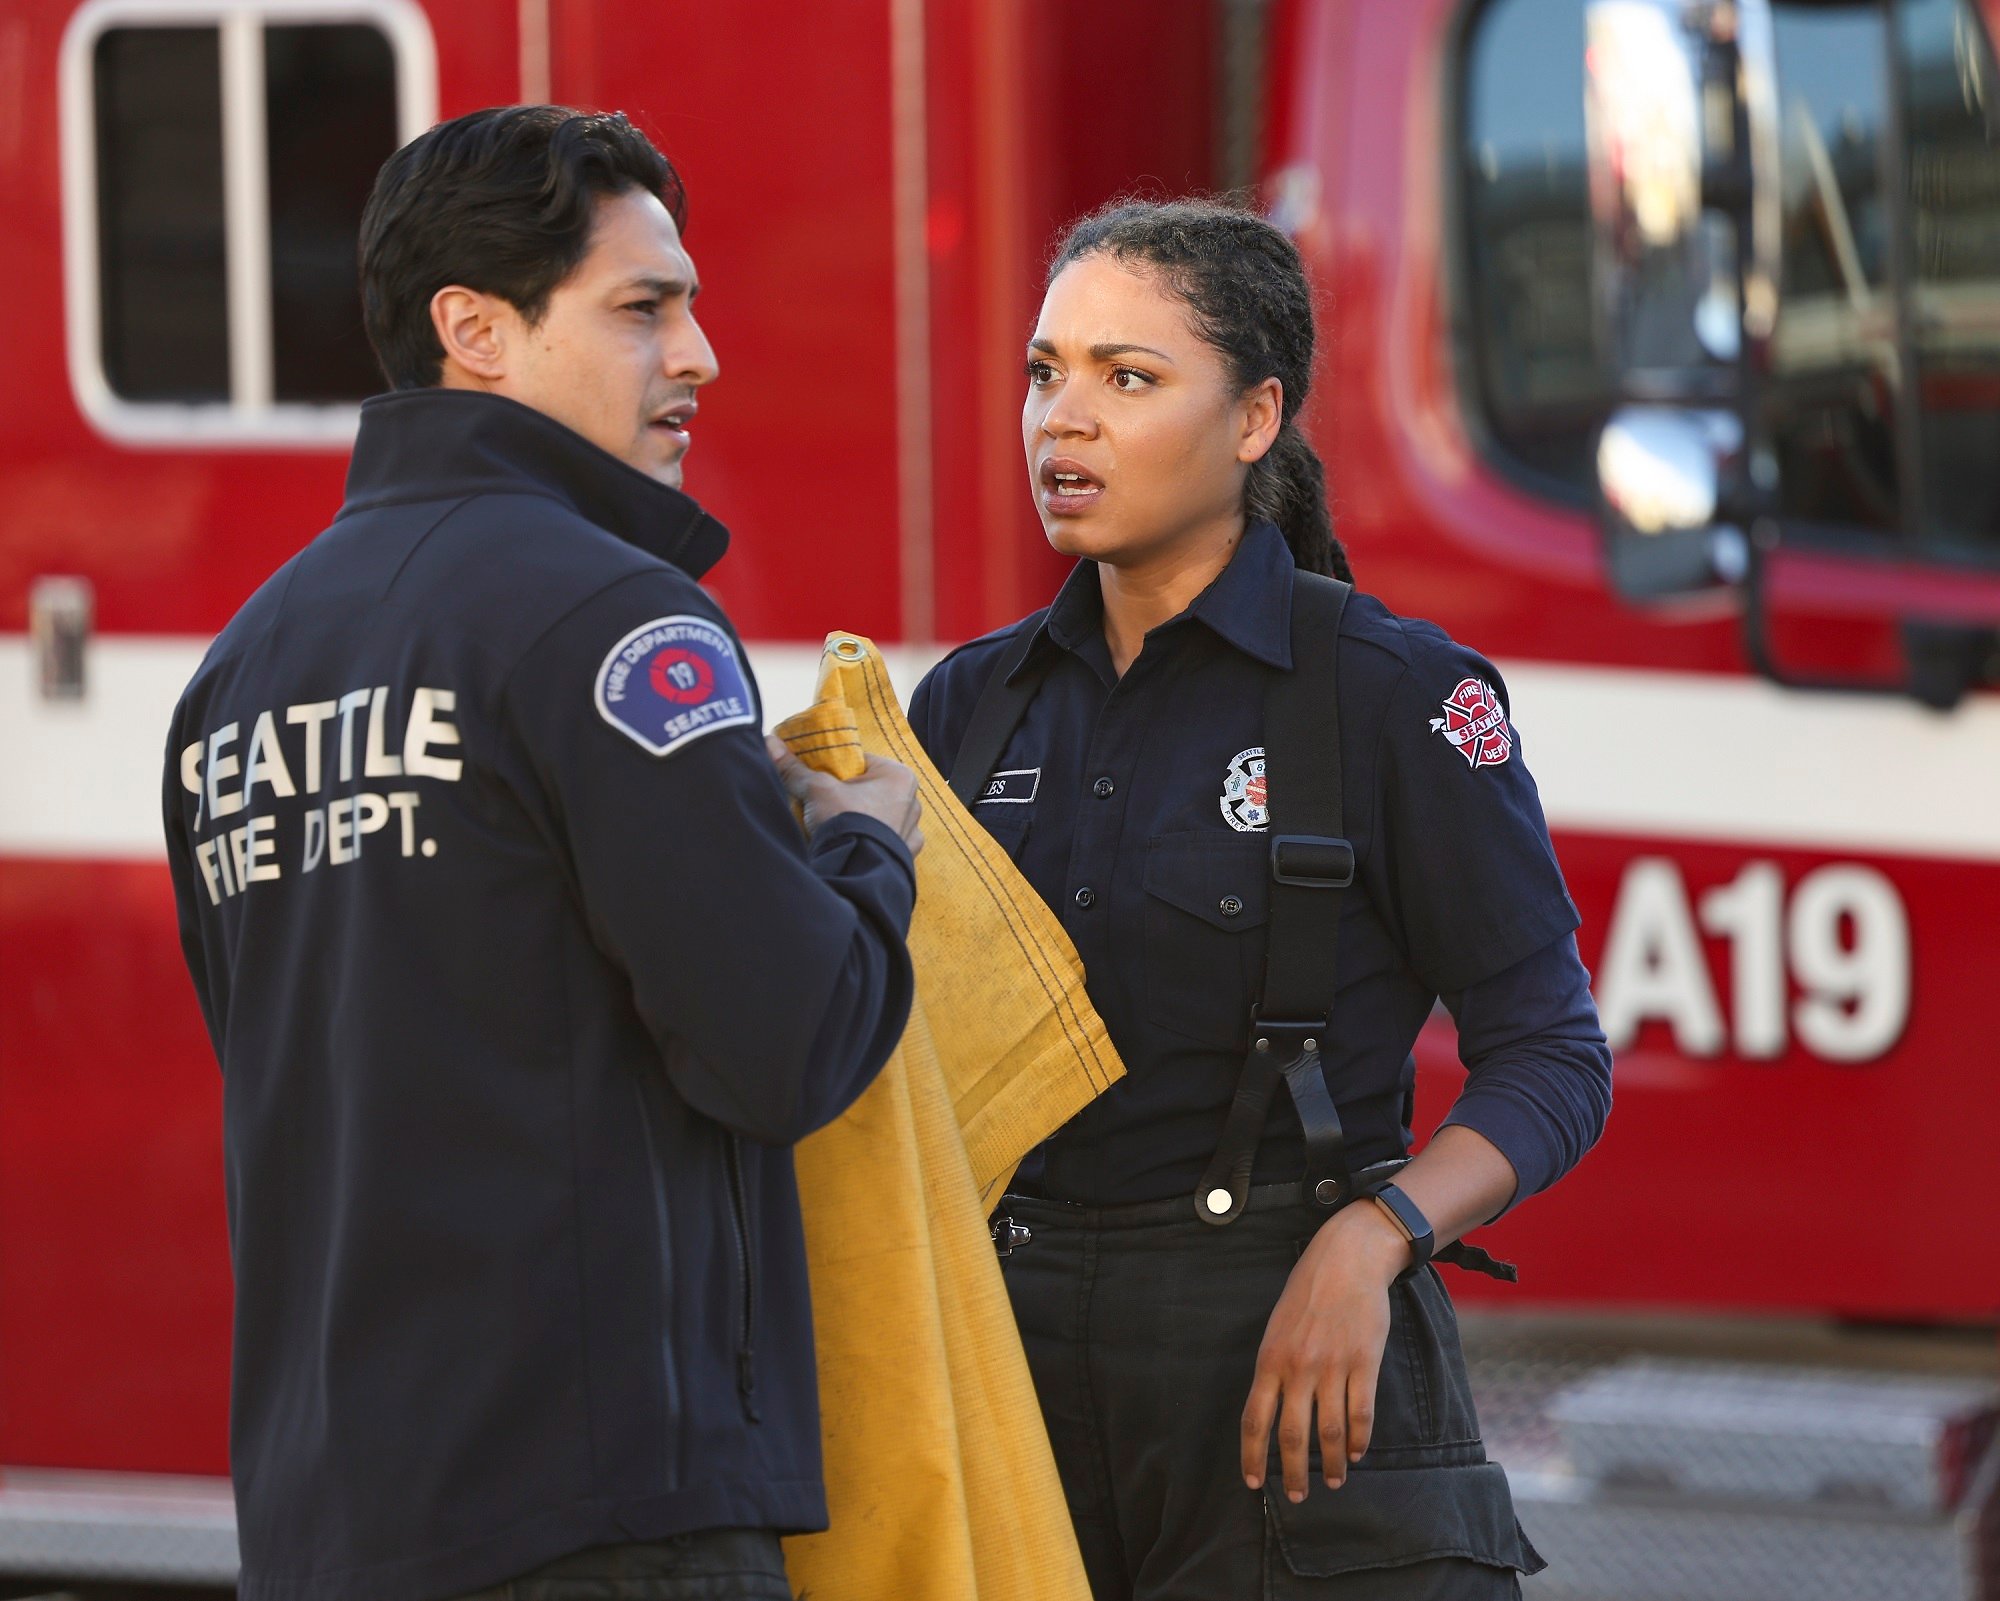 'Station 19' Season 6 All the Spoilers Leaked So Far